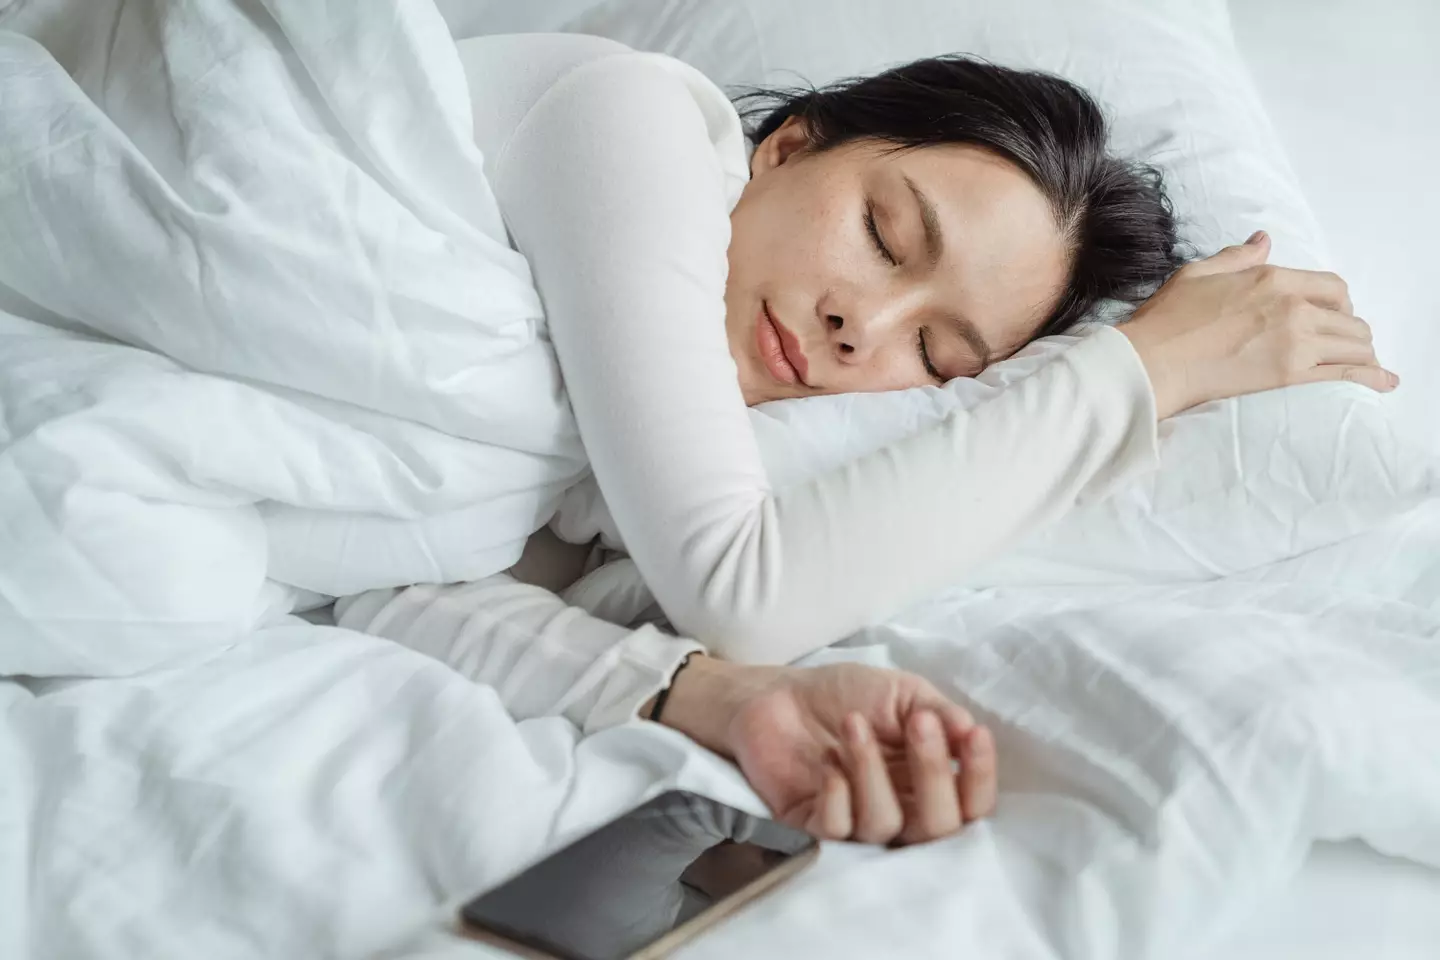 Snoozing alarms results in us drifting in and out of sleep cycles, which is why we may feel so groggy and tired in a morning.